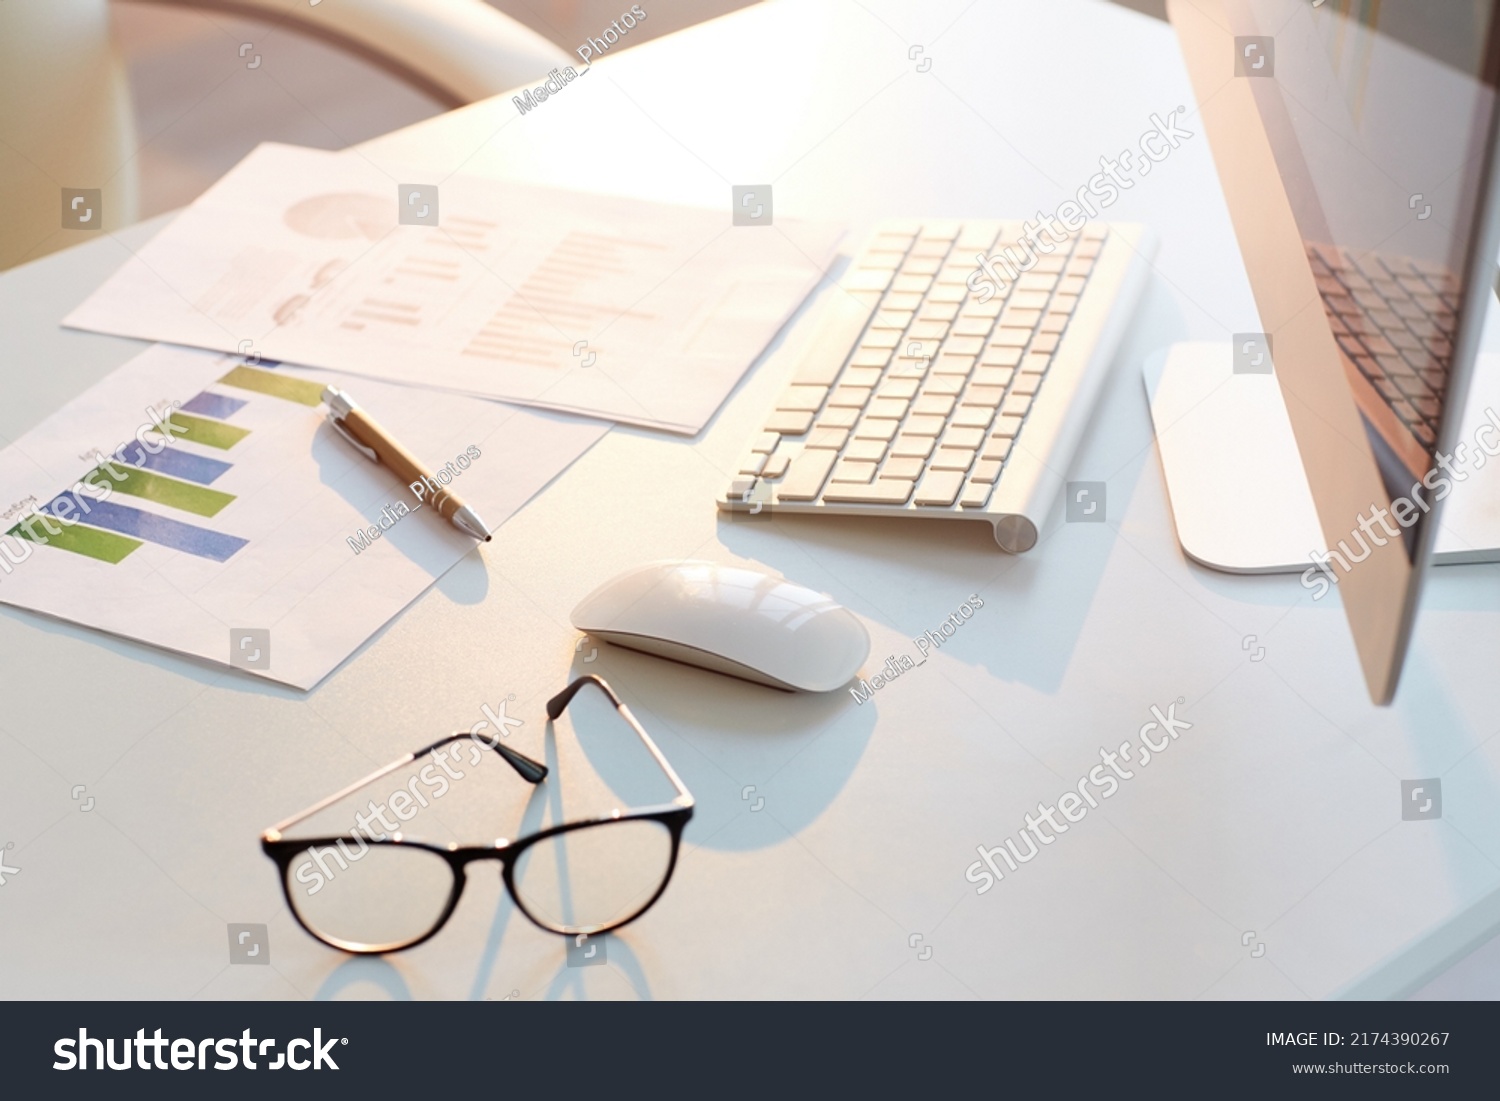 Close-up of business papers with graphs and charts placed on desk with computer, eyeglasses and pen, background #2174390267